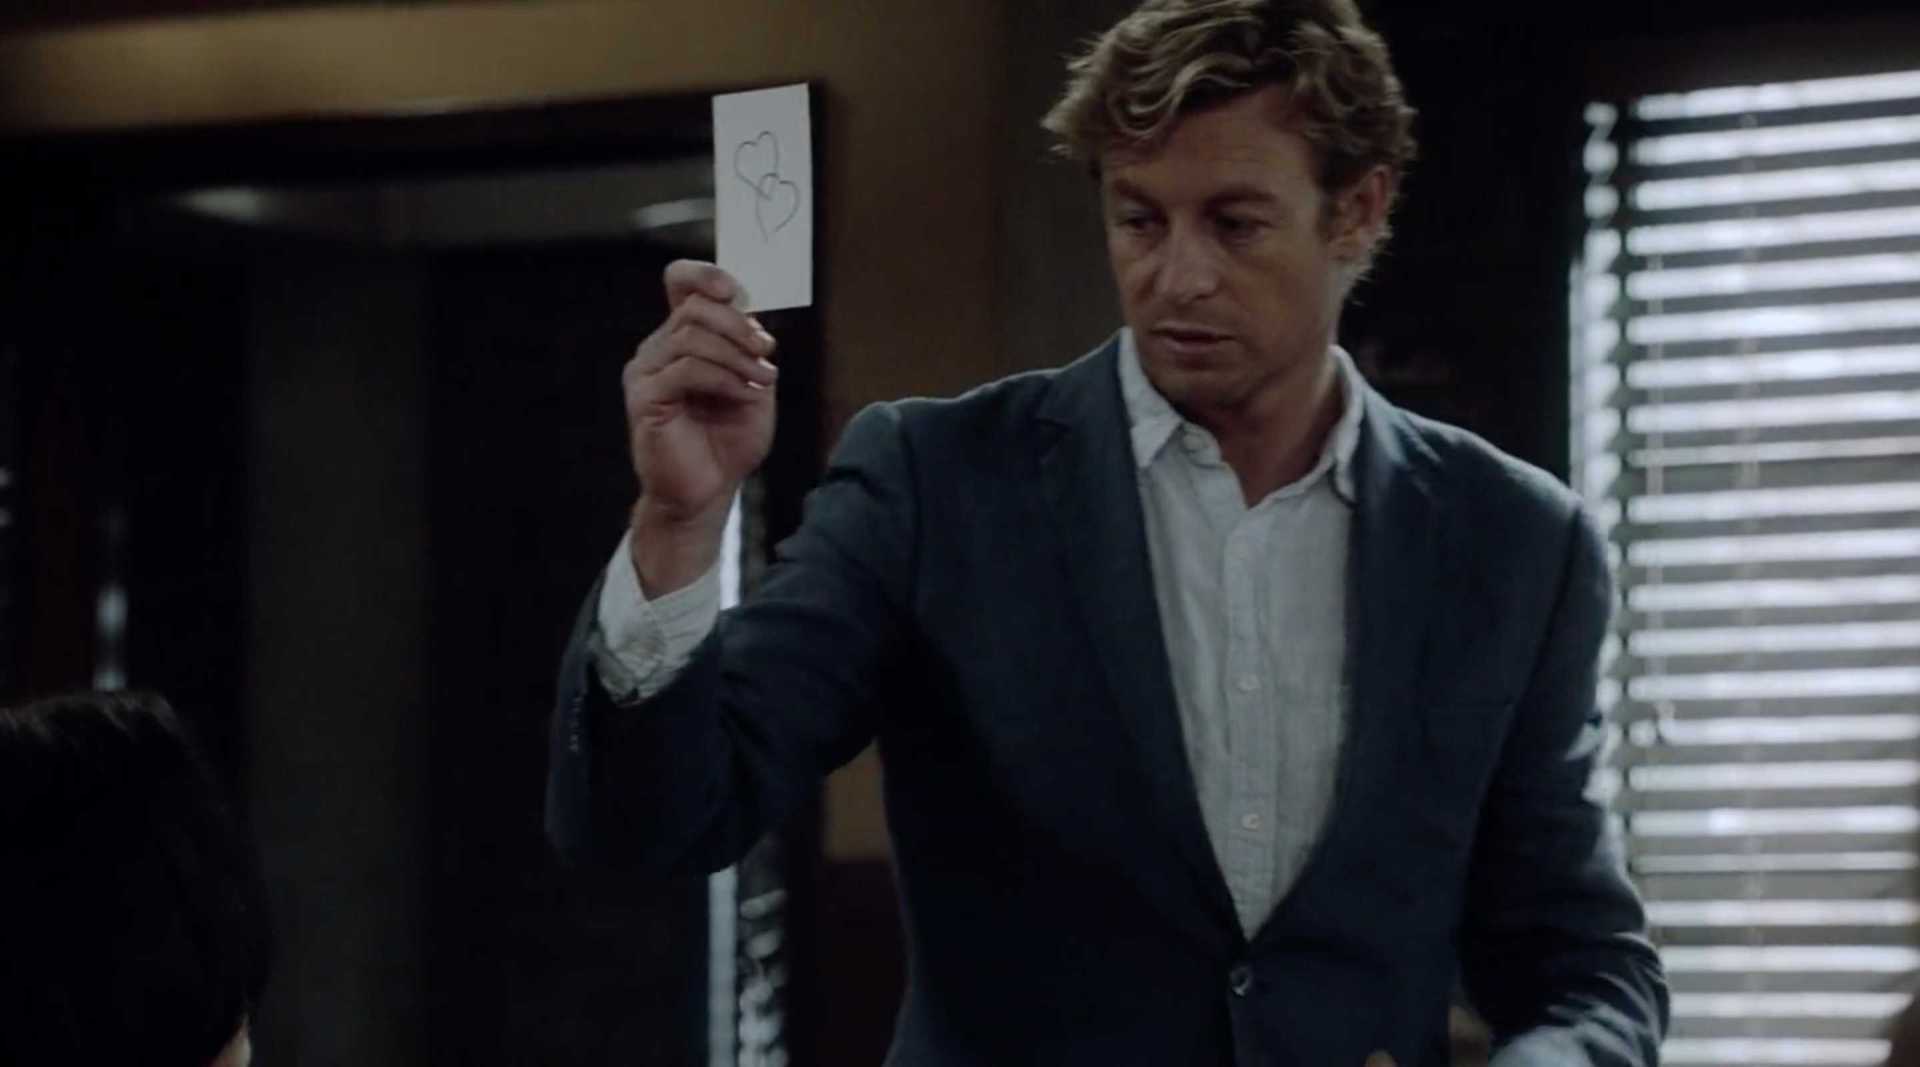 The Mentalist - Patrick Jane holds up a card